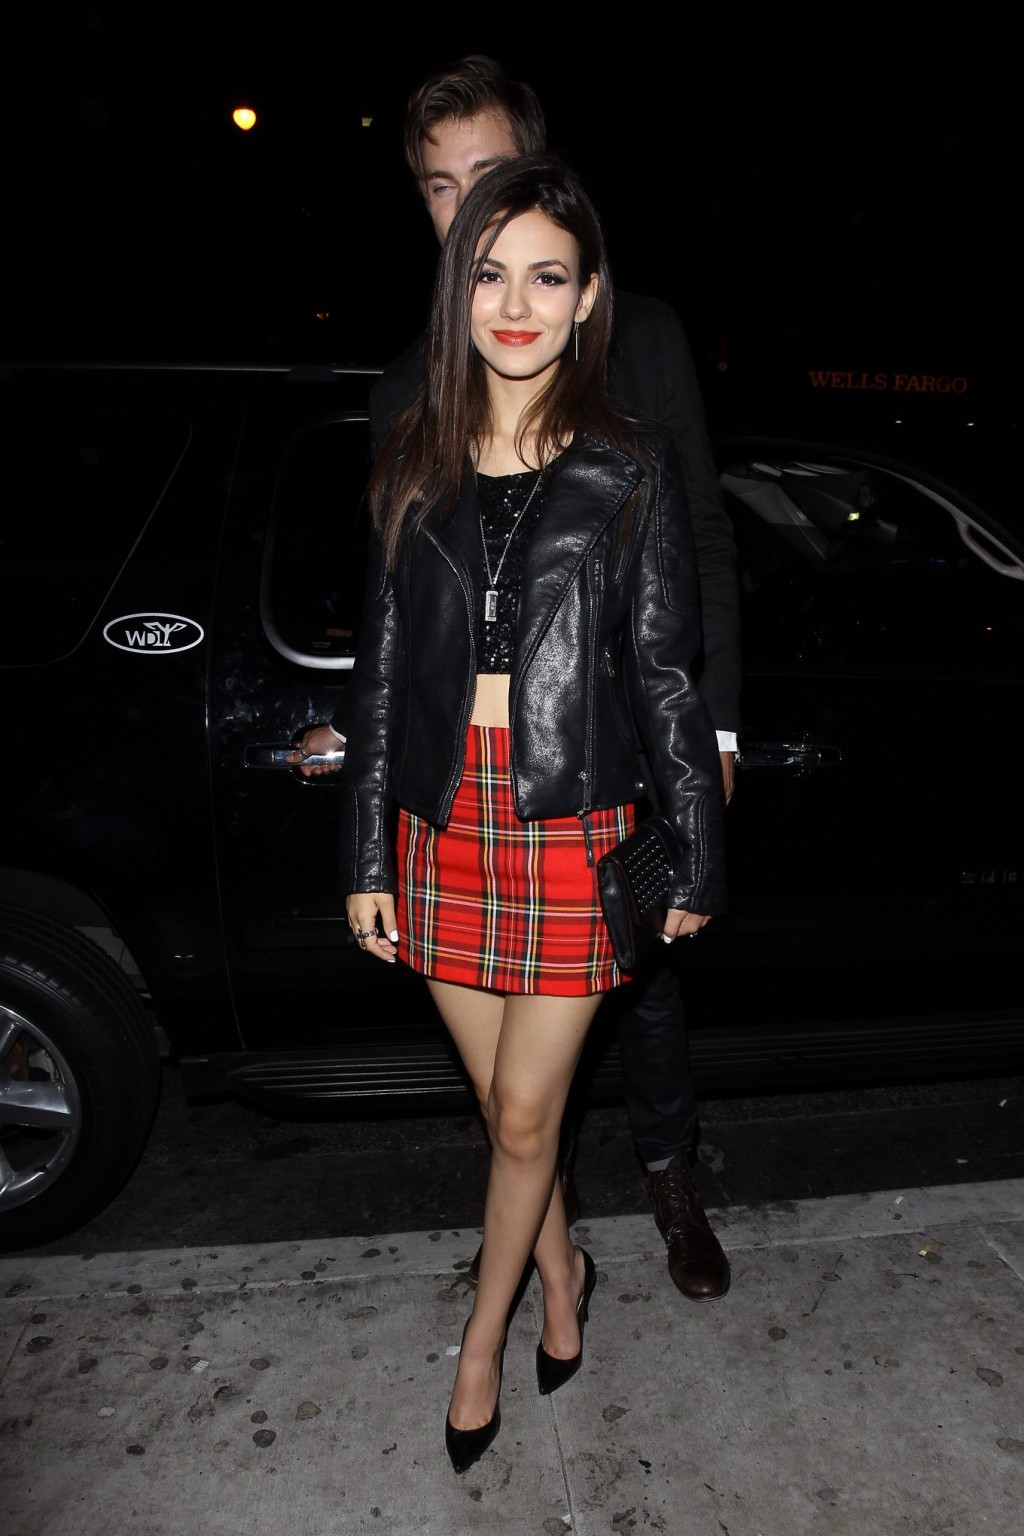 Victoria Justice leggy in plaid mini skirt leaving the Roxy Theatre in West Holl #75195078